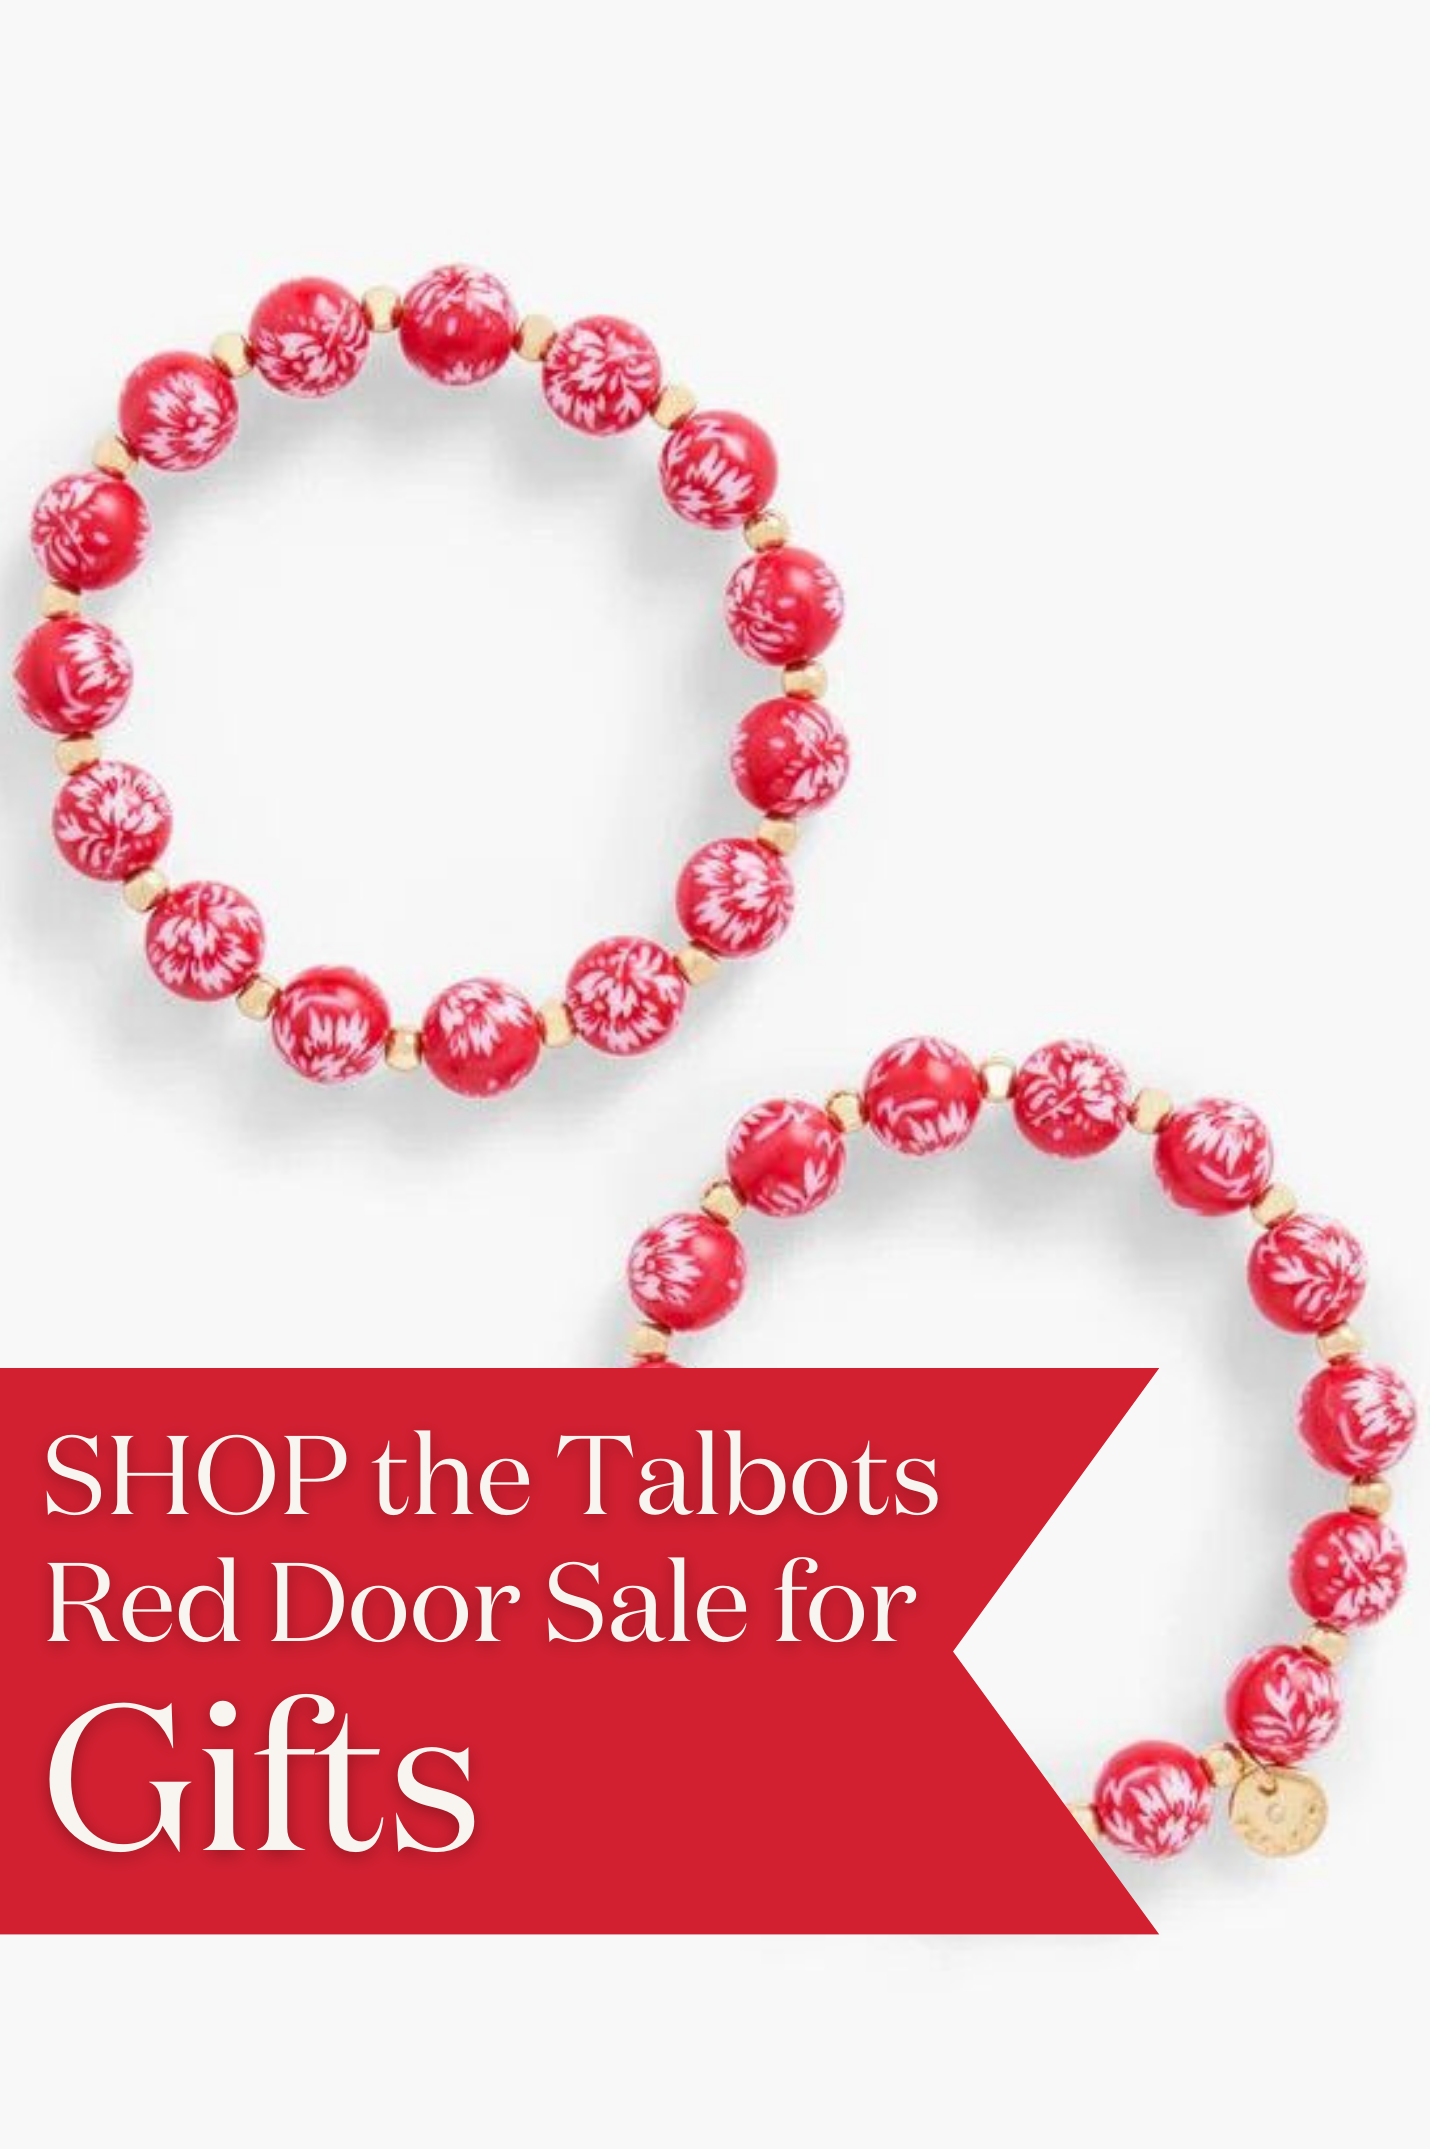 Shop the Red Door Sale for Gifts